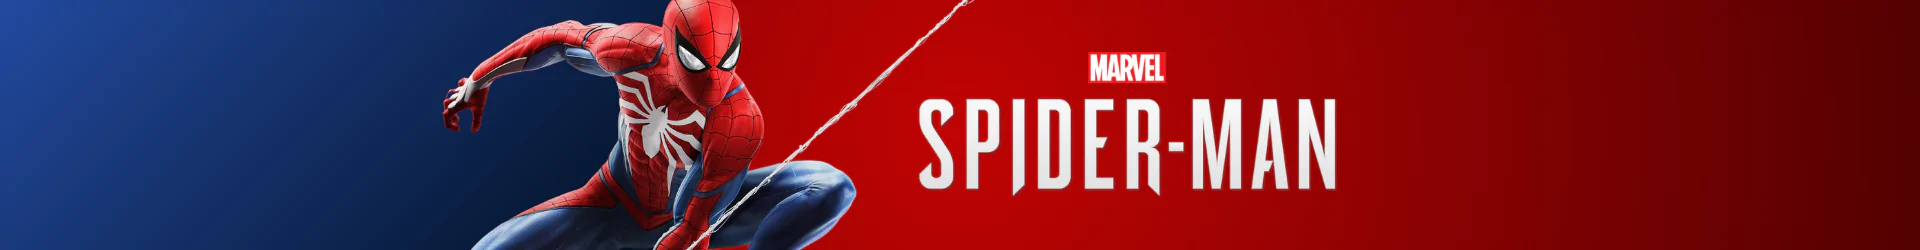 Spider-Man lunch containers banner